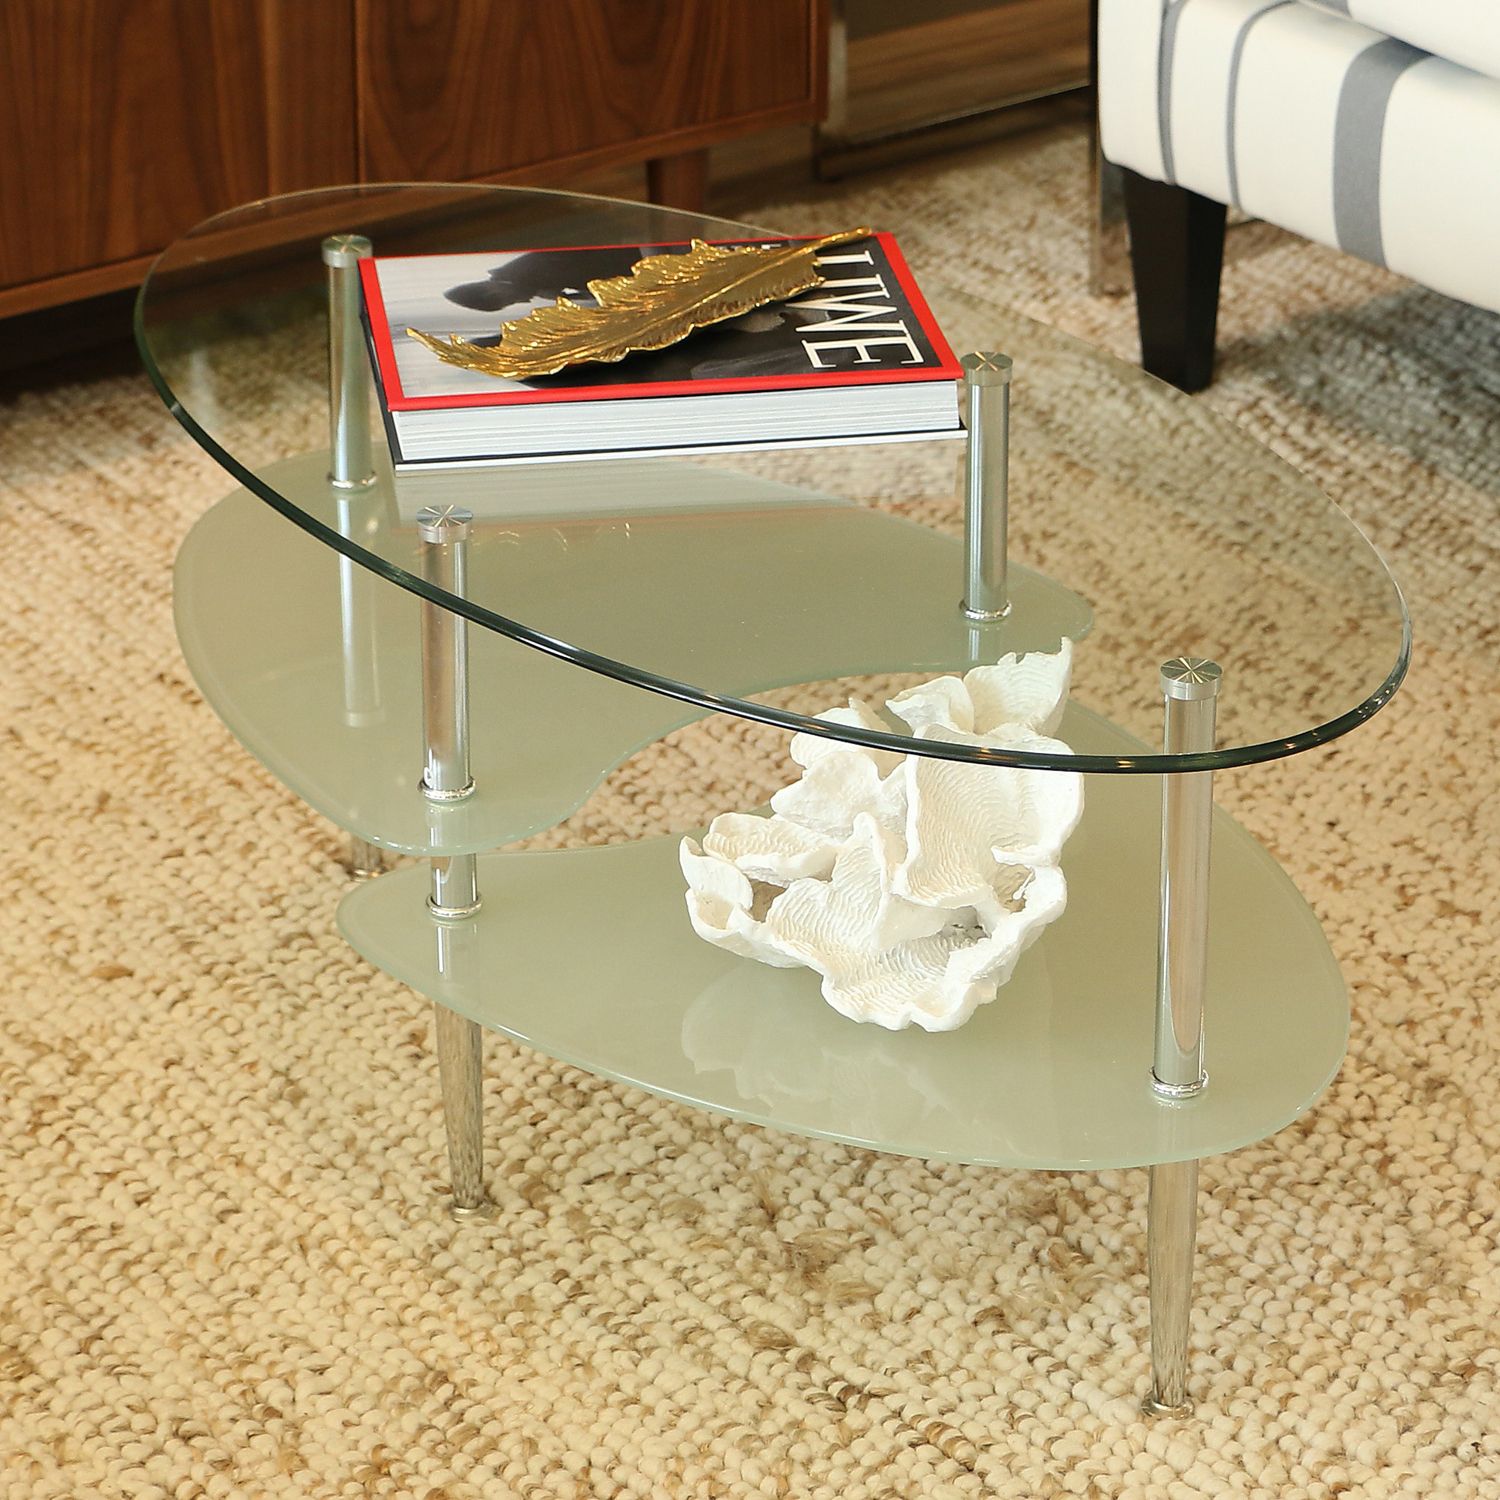 2020 Glass And Gold Oval Coffee Tables With Oval Glass Coffee Table With Chrome Legs – Pier1 Imports (Gallery 6 of 20)